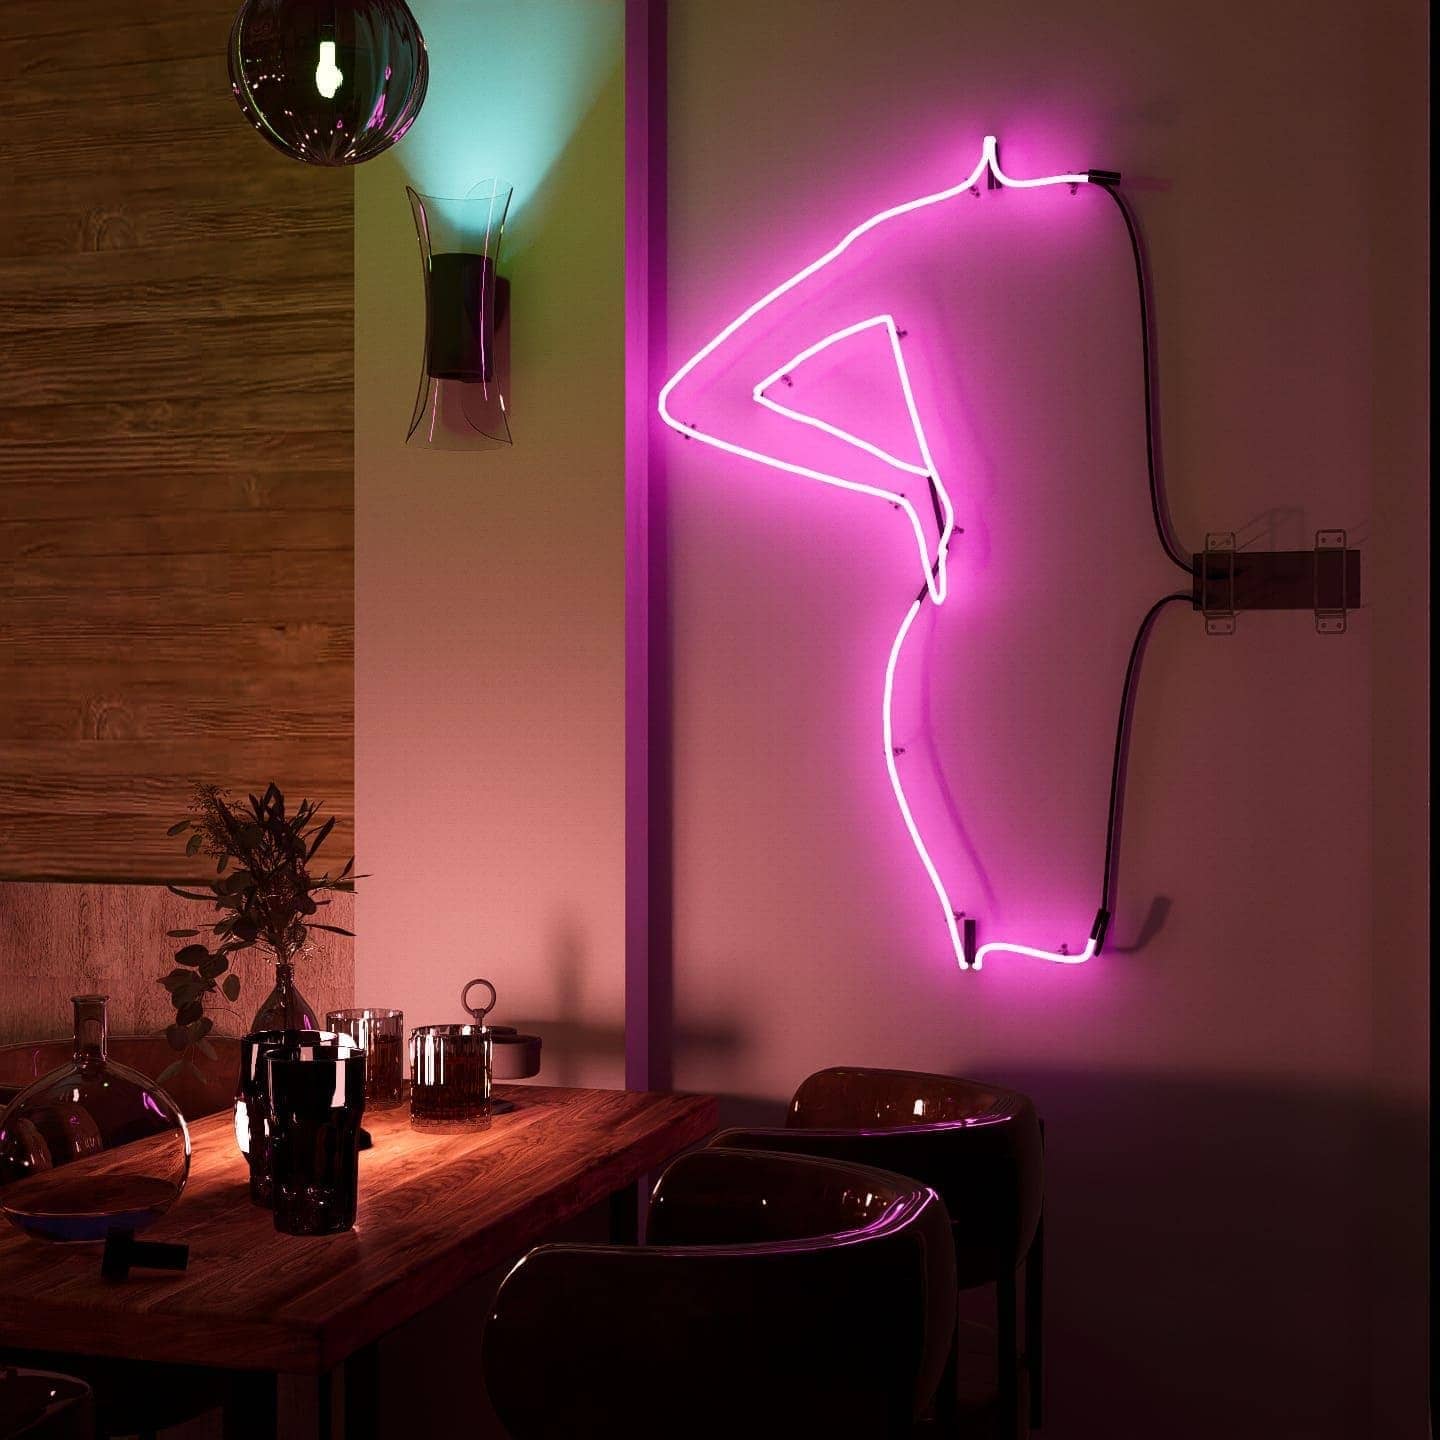 Neon Lady glass neon sign radiating love and warmth in vibrant colors